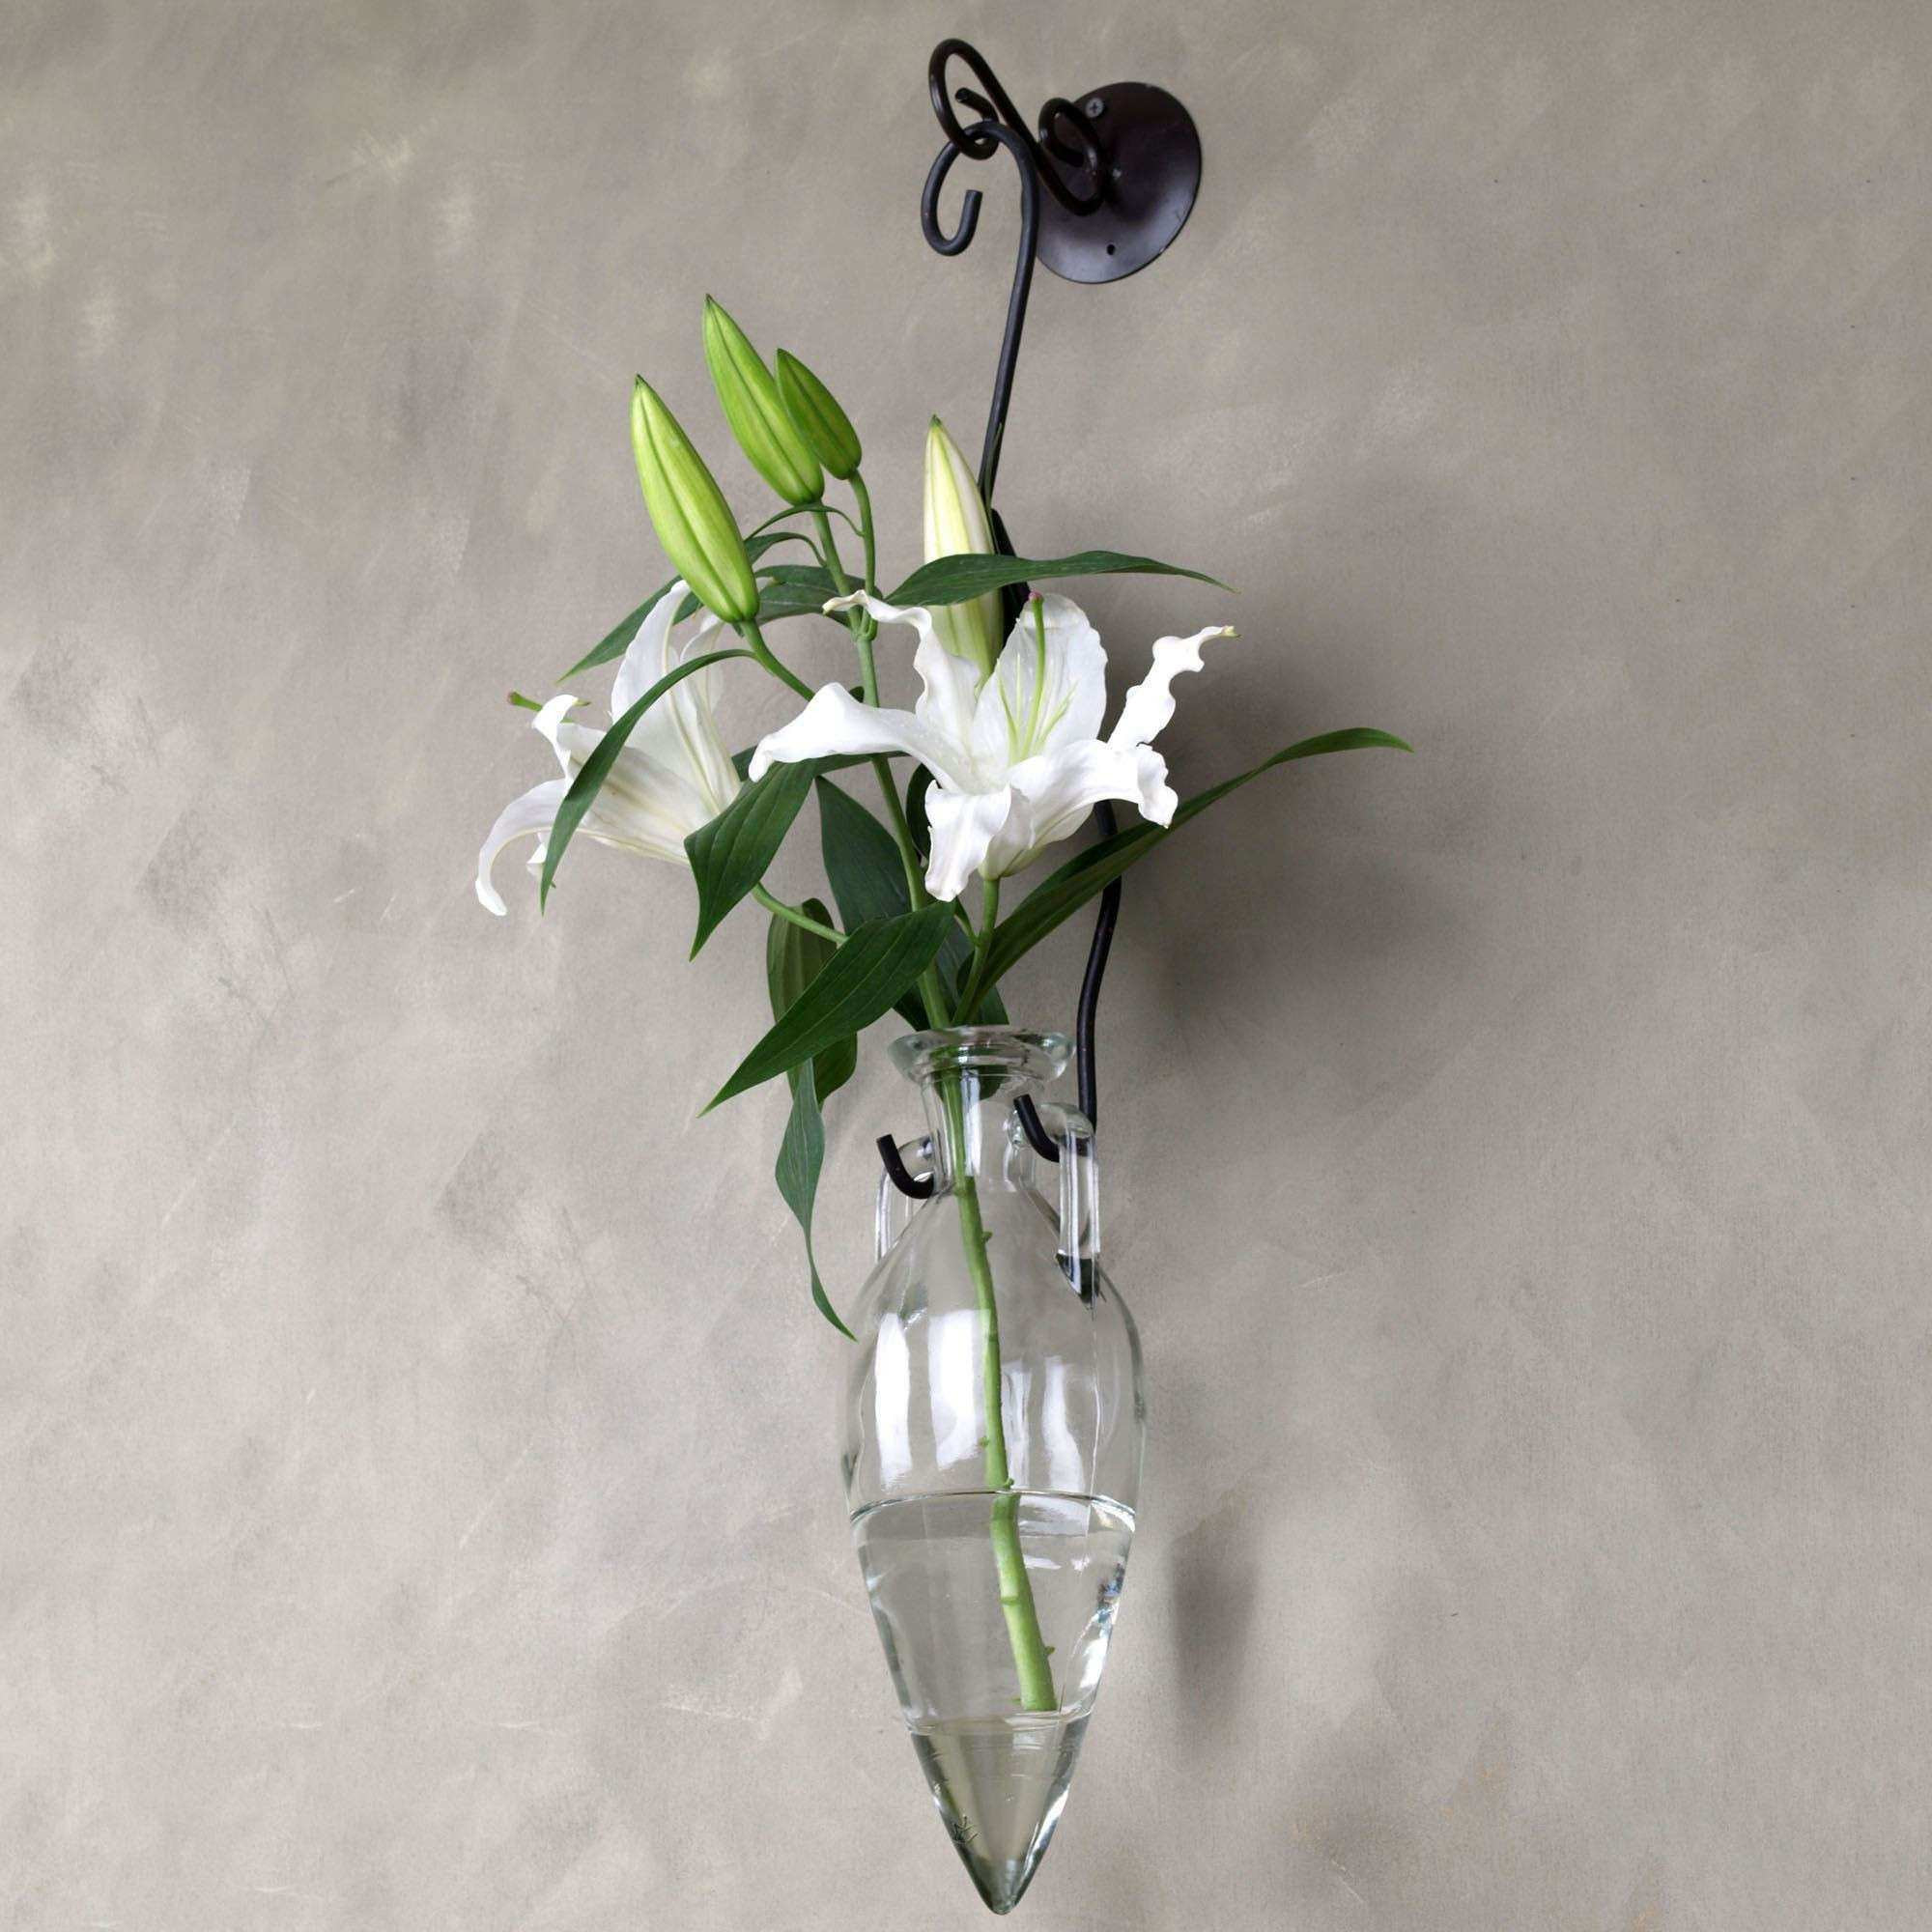 17 Unique Ideas for Glass Vases for Centerpieces 2024 free download ideas for glass vases for centerpieces of scandinavian wall art prints new h vases wall hanging flower vase within scandinavian wall art prints new h vases wall hanging flower vase newspaper